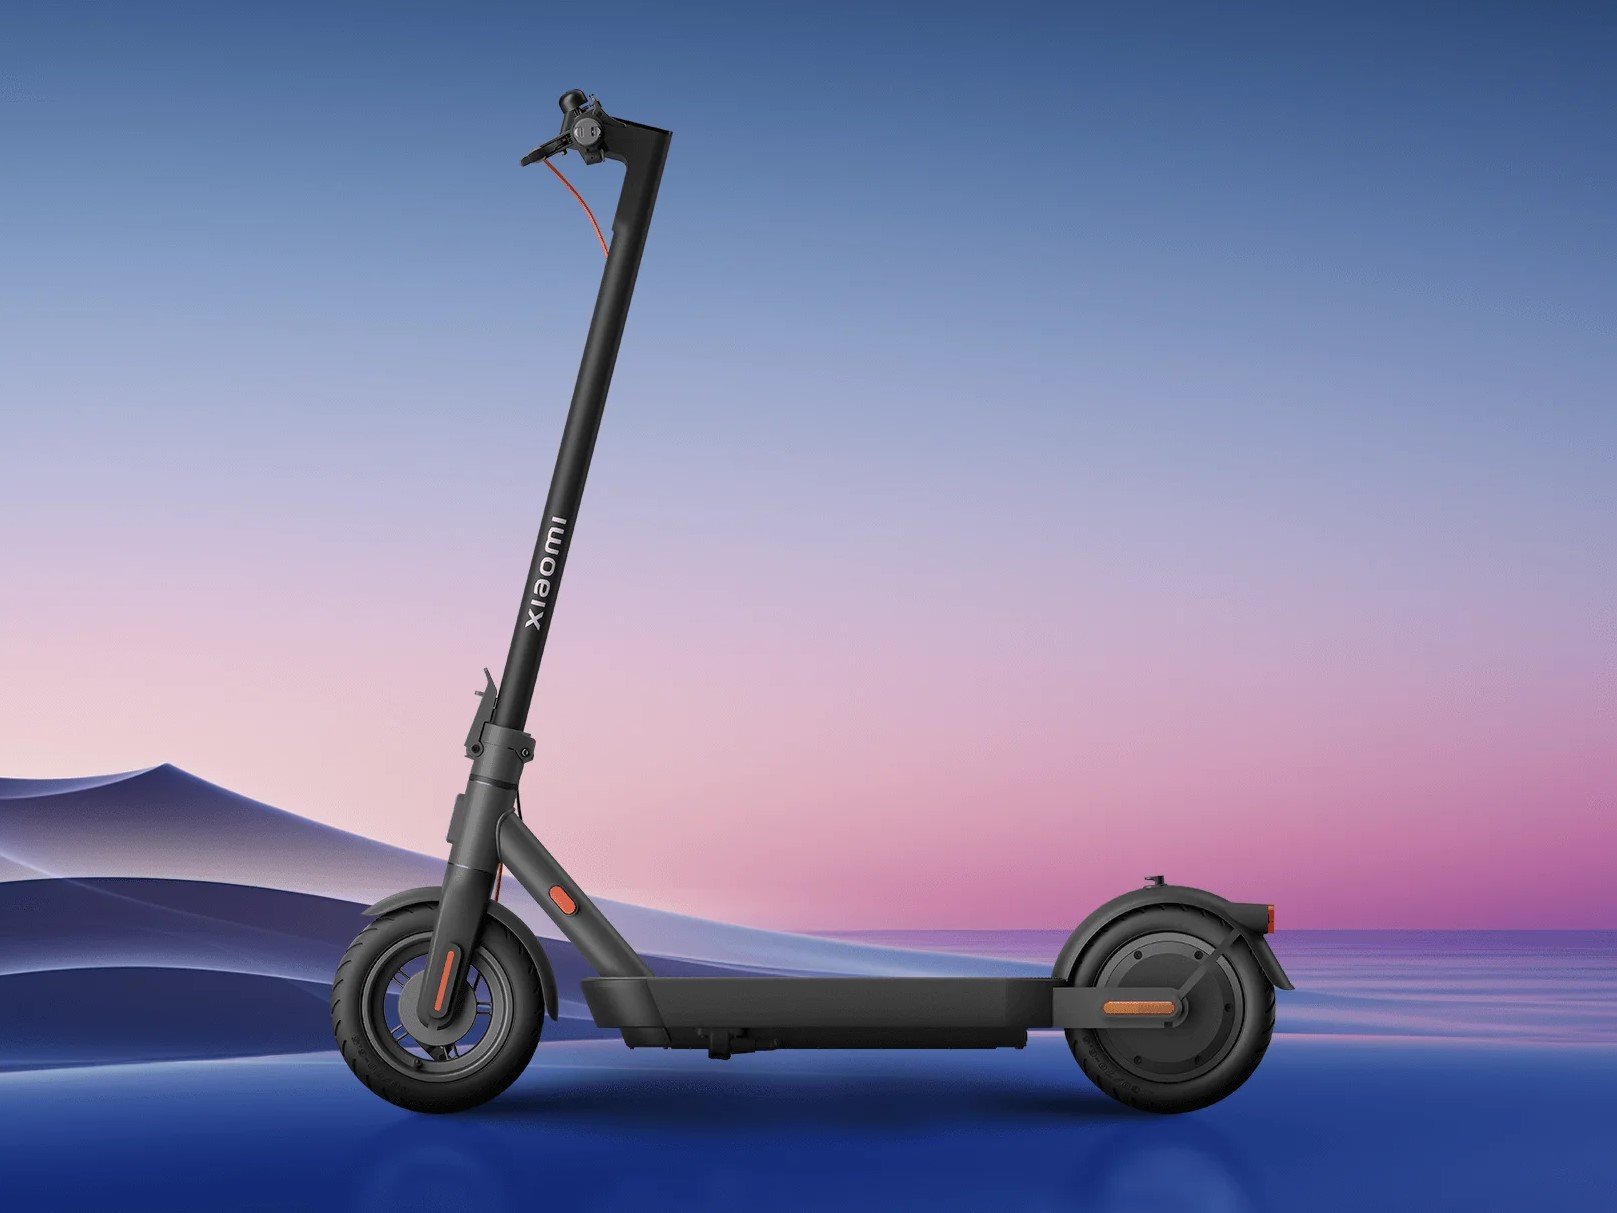 Xiaomi Electric Scooter 4 Pro (2nd Gen) with a 1,000W peak power and longer range launched - News - News